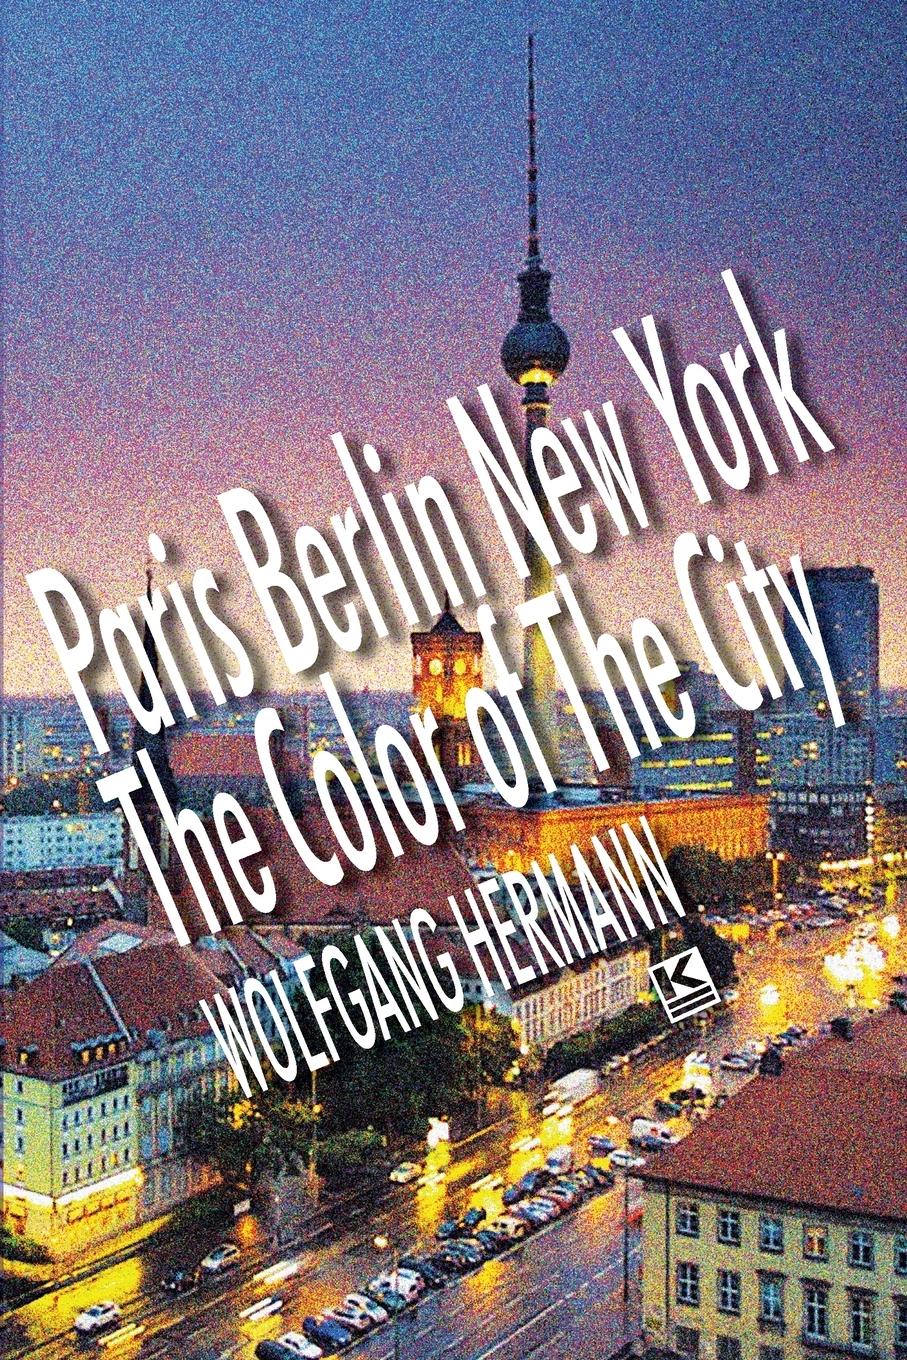 Paris Berlin New York - The Color of the City - Hermann, Wolfgang